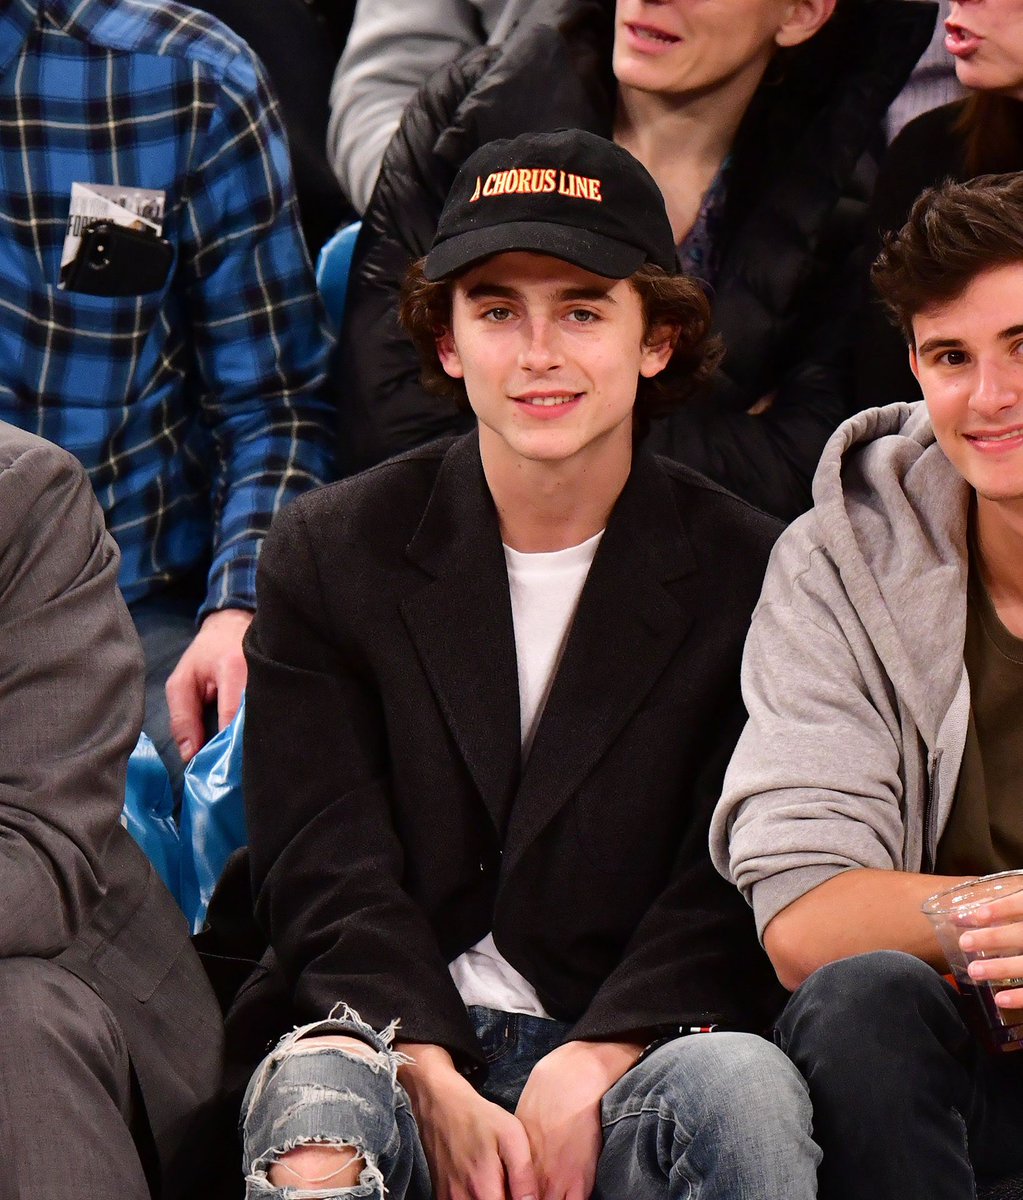 starting a thread of images that I consider very important “Timothée Chalamet Wearing ‘A Chorus Line’ Hat’”